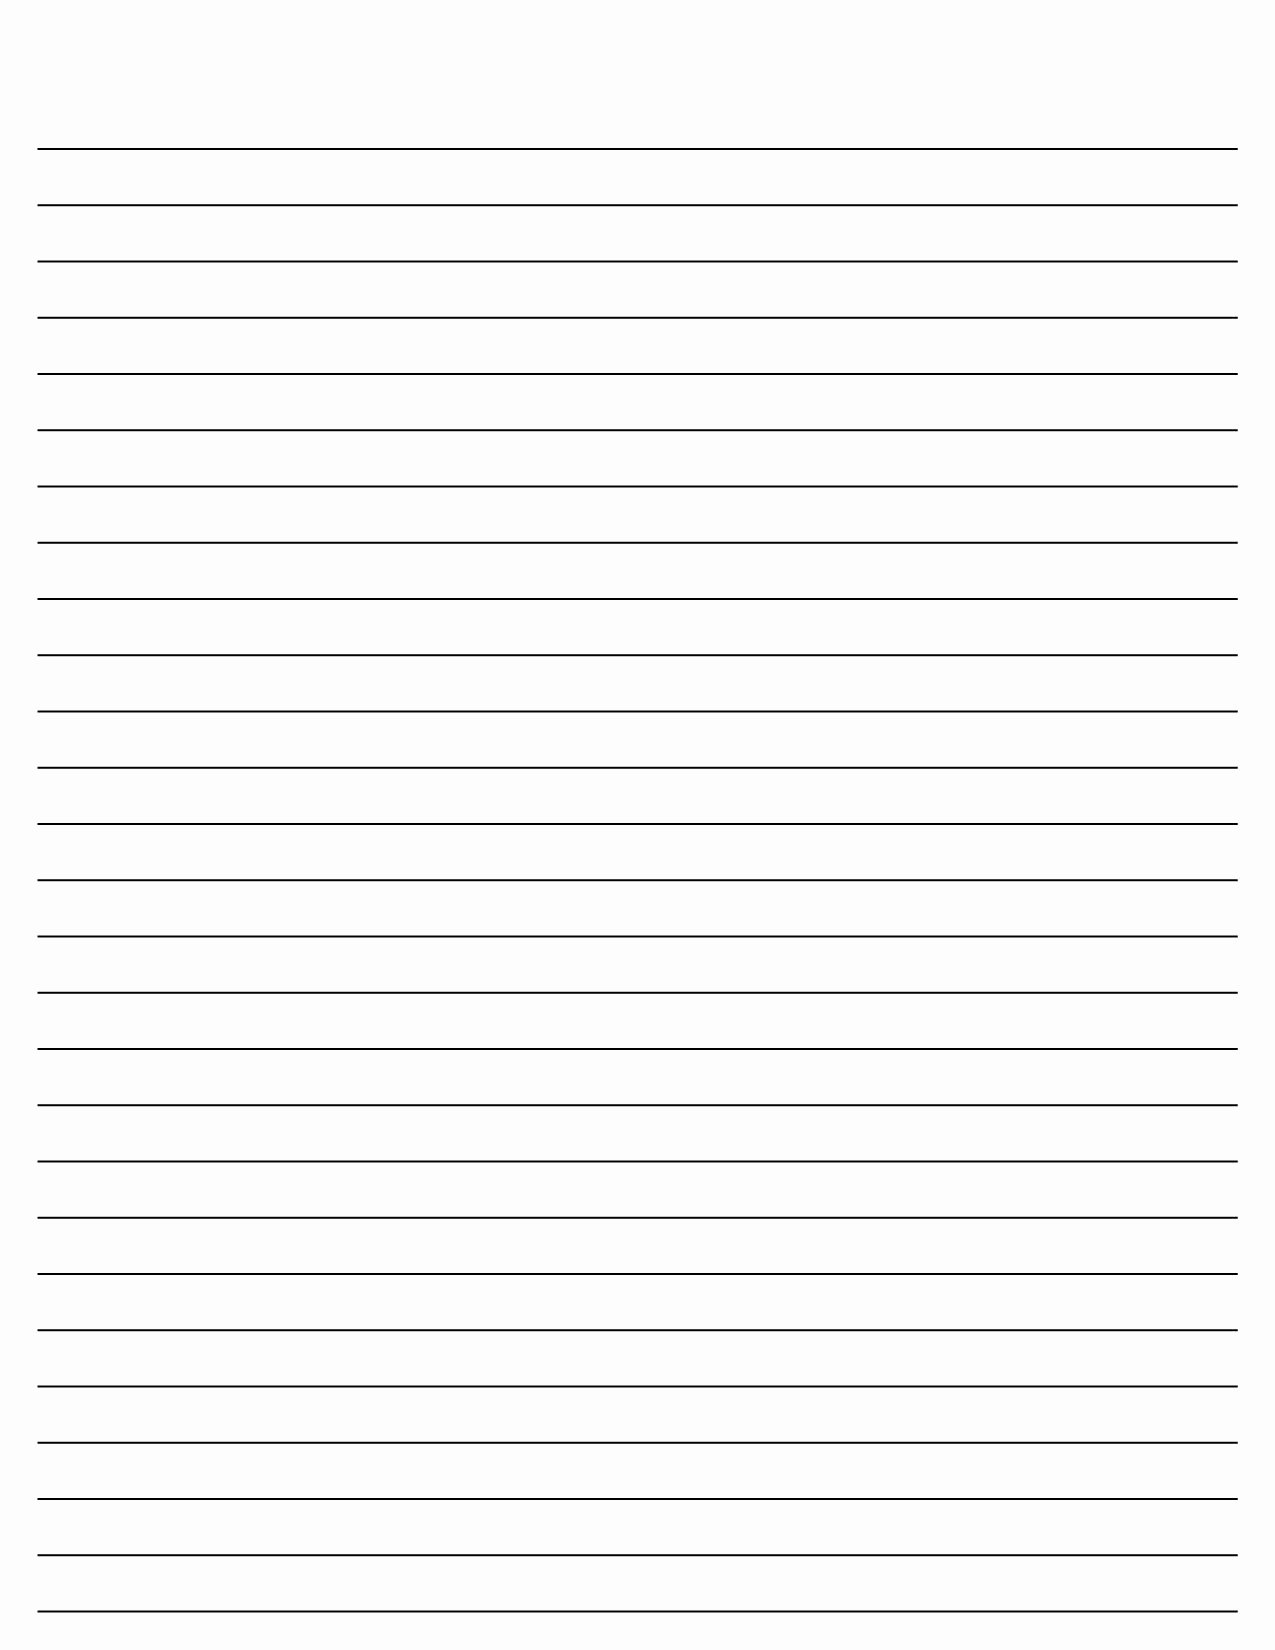 Free Printable Lined Paper Best Of Printable Lined Paper Search Results Landscaping